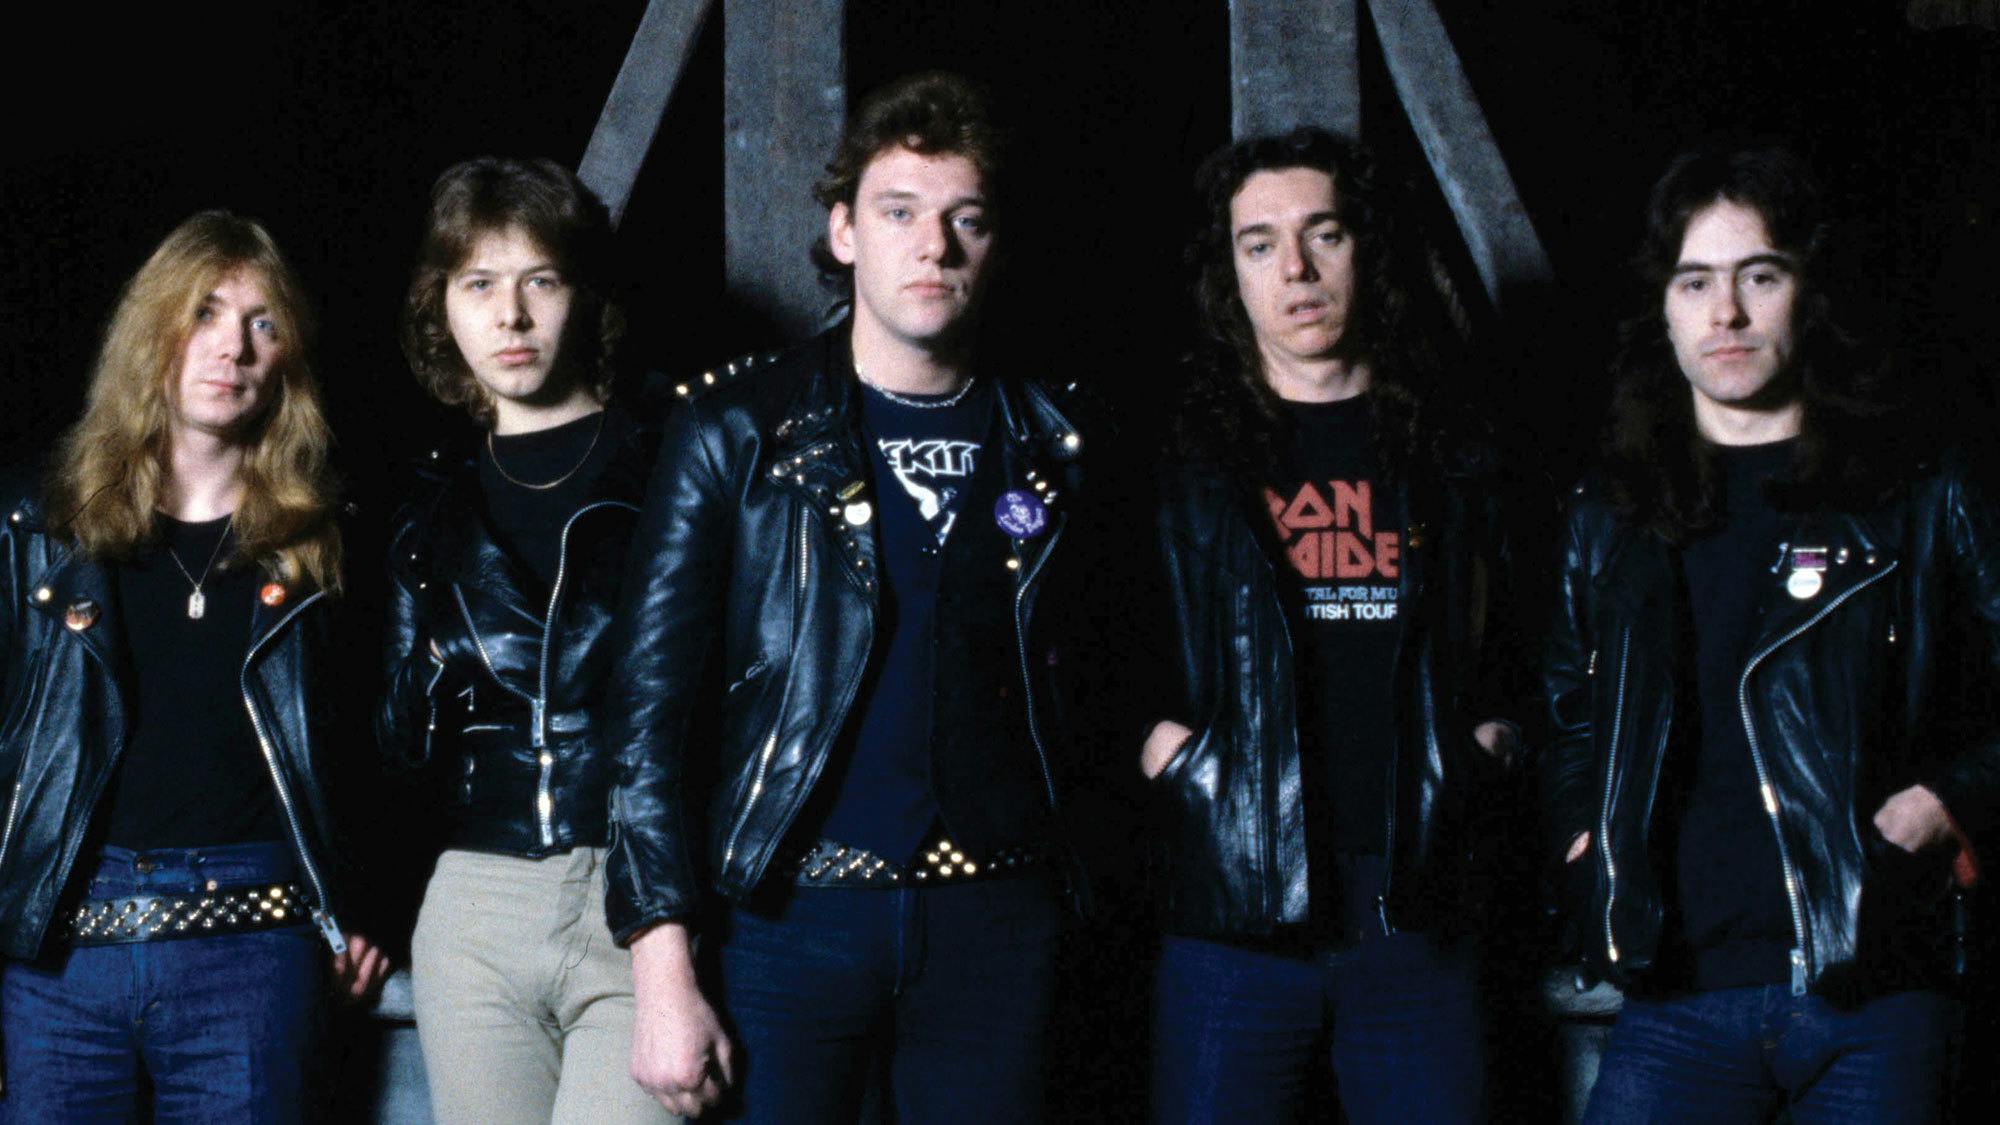 “I couldn’t have started a punk band, that would have been against my religion”: The story behind Iron Maiden's debut album